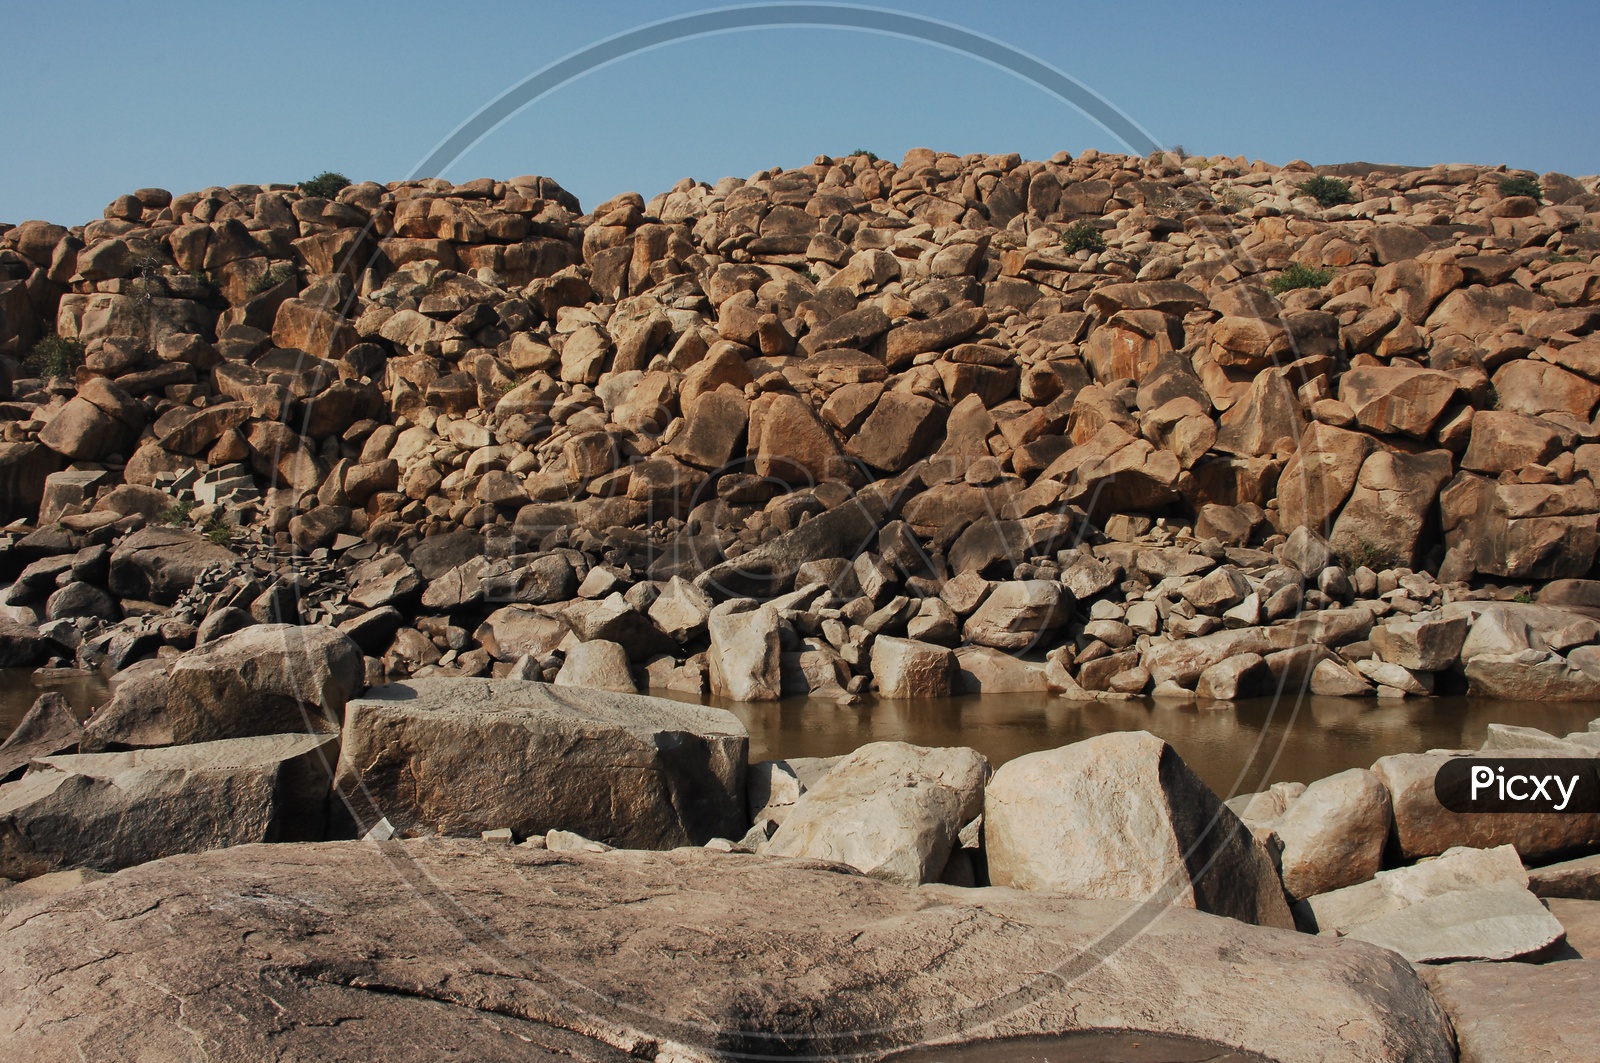 large rocks in an open area and water